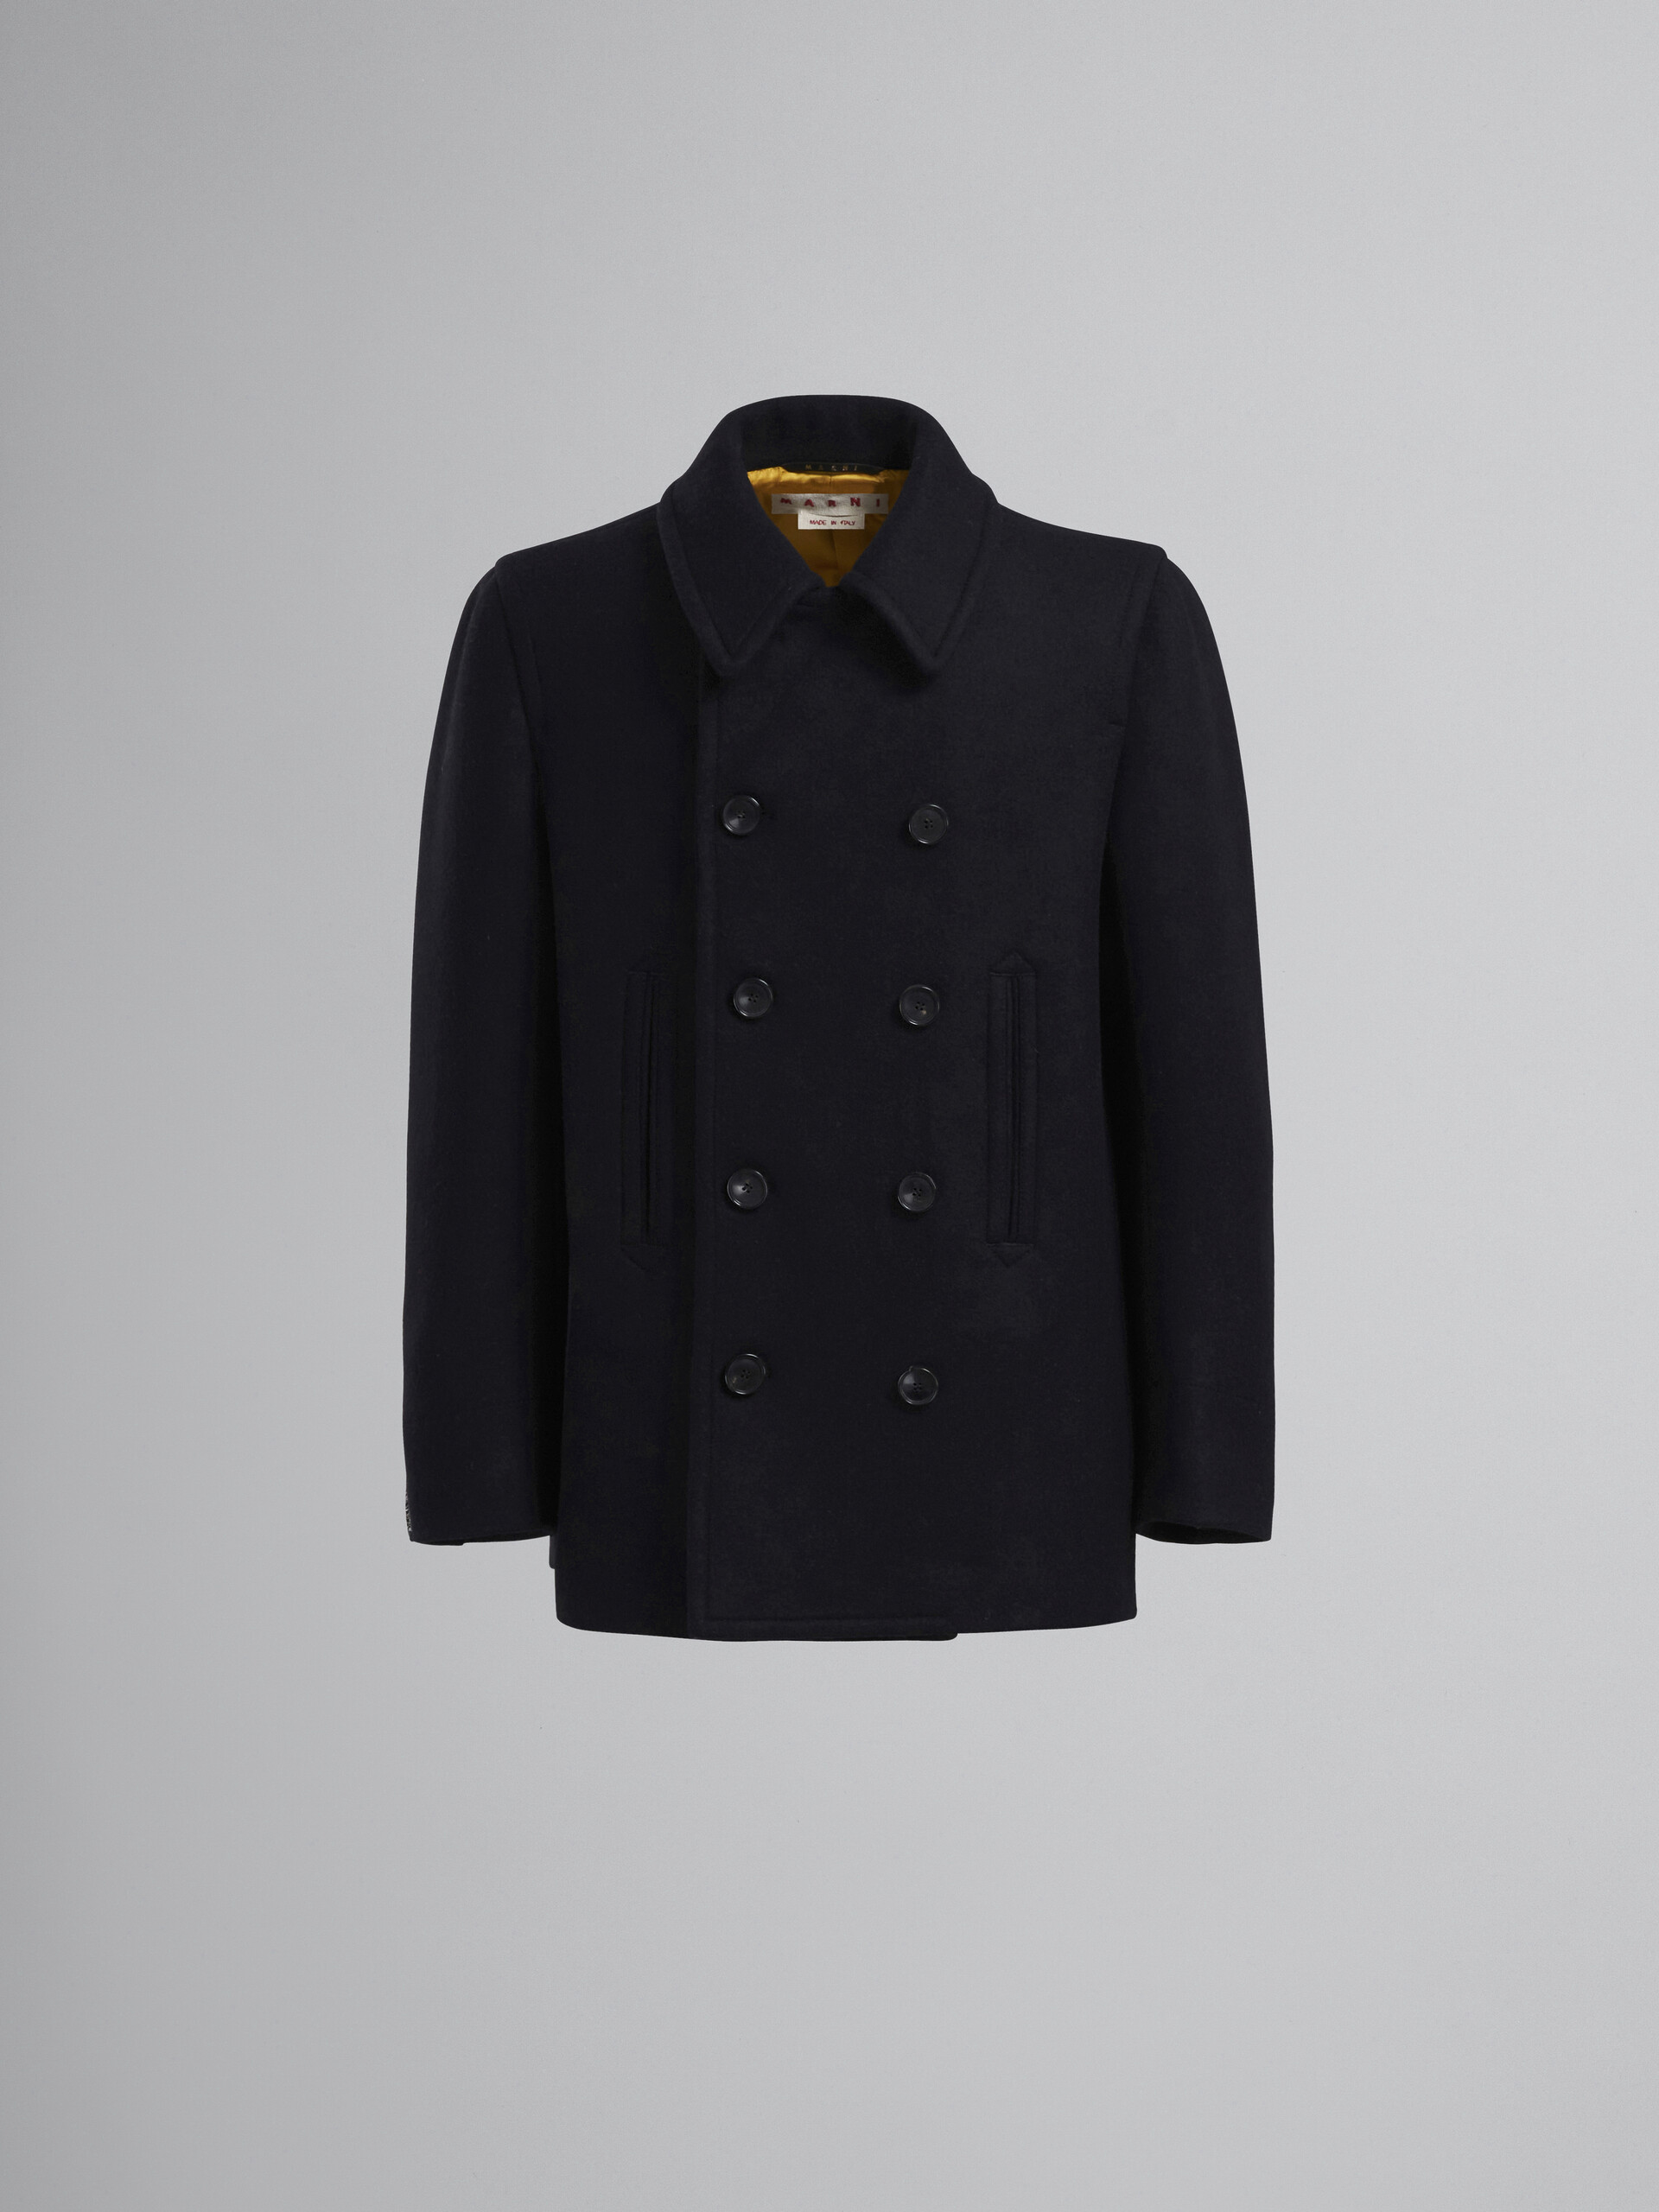 Black double-breasted wool peacoat - Coats - Image 1